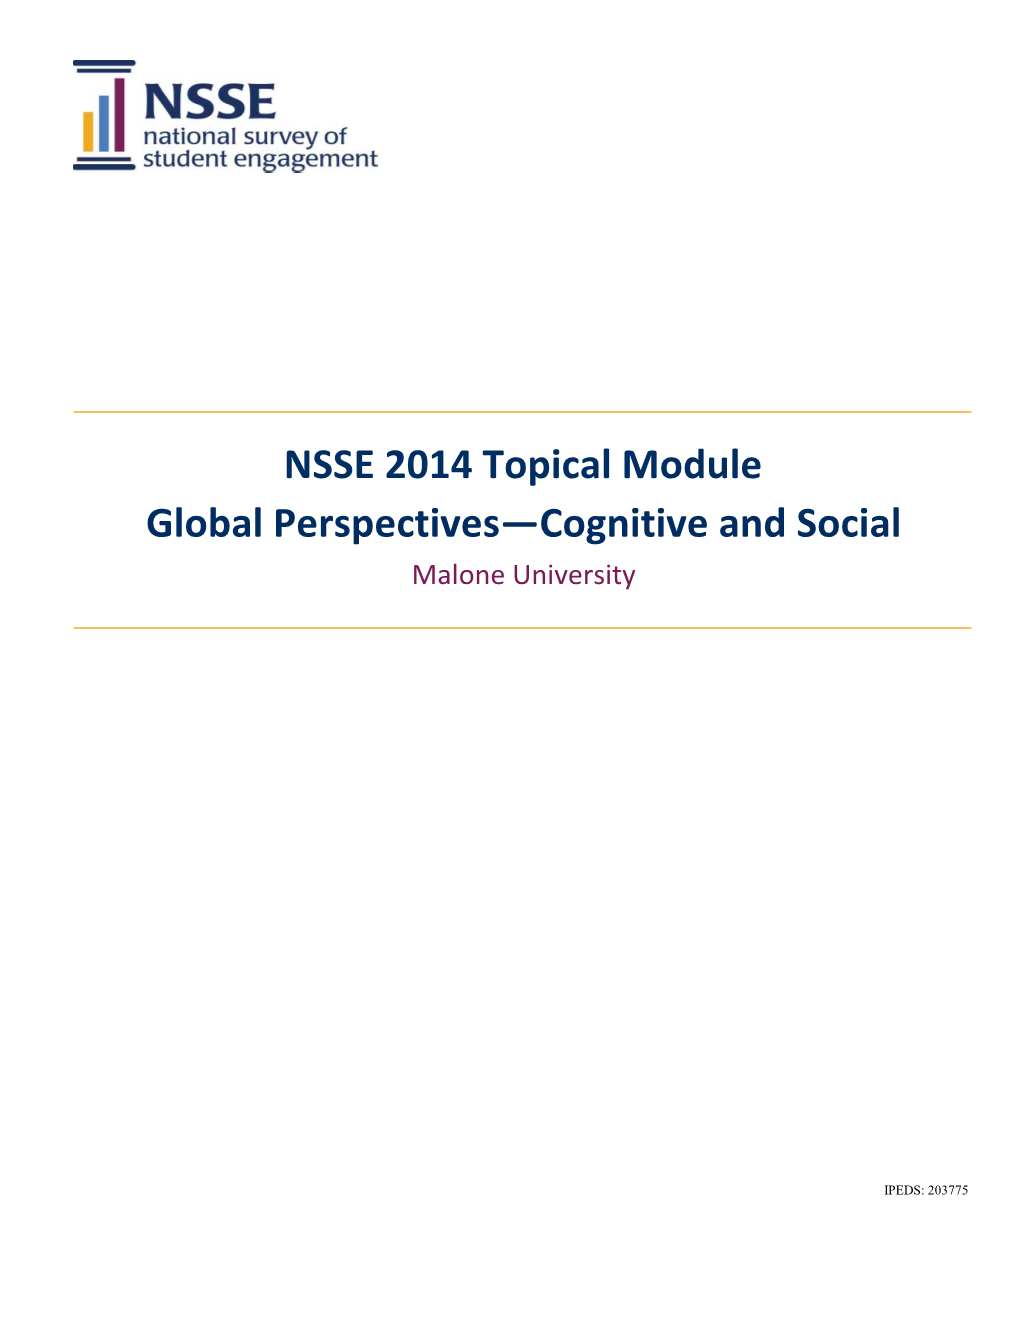 NSSE 2014 Topical Module Global Perspectives—Cognitive and Social Malone University